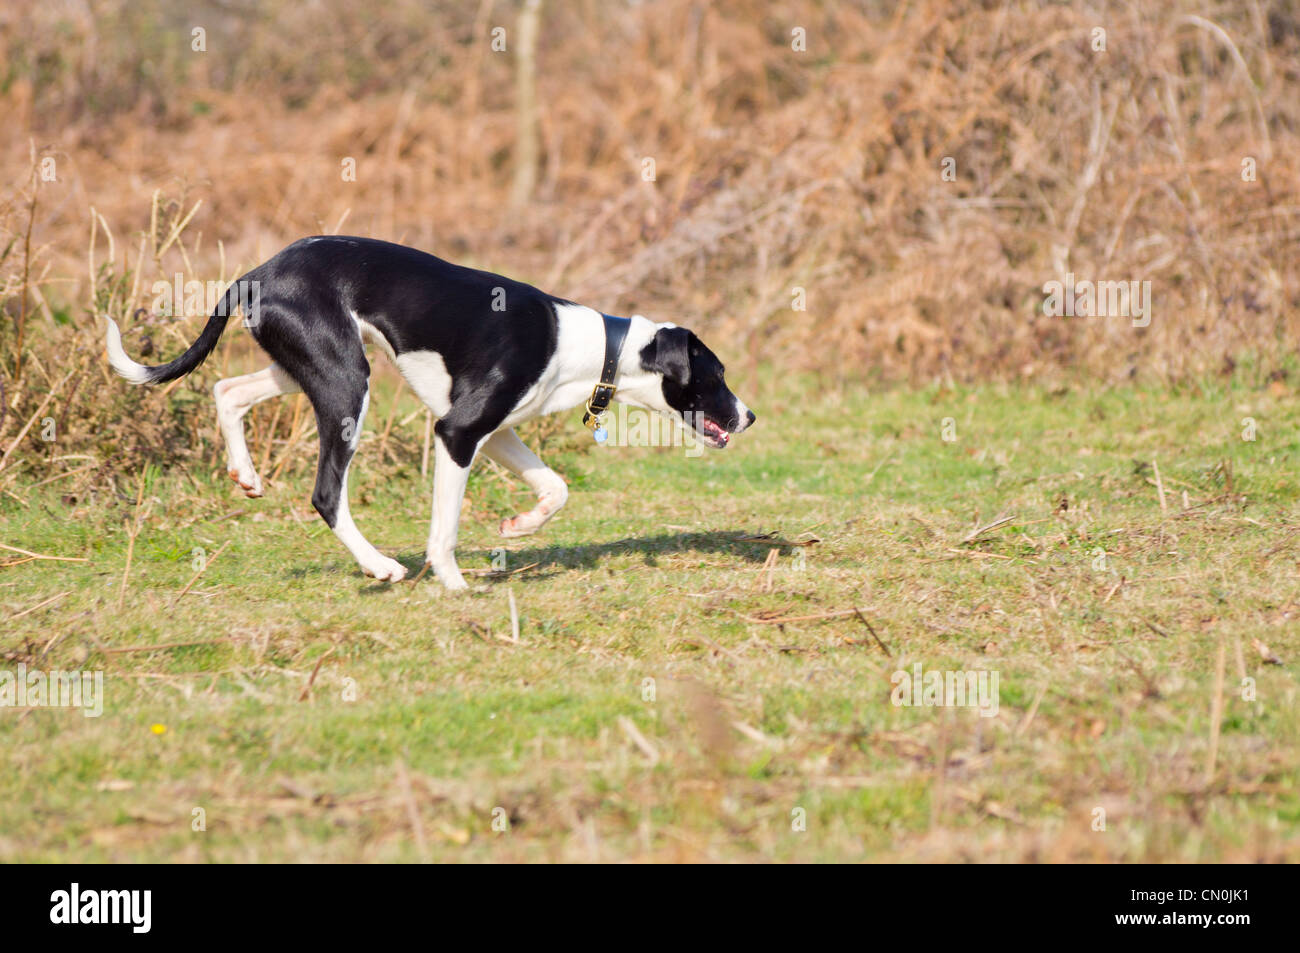 A black and white Lurcher dog running through bracken with his head down on a Spring, sunny day. Stock Photo